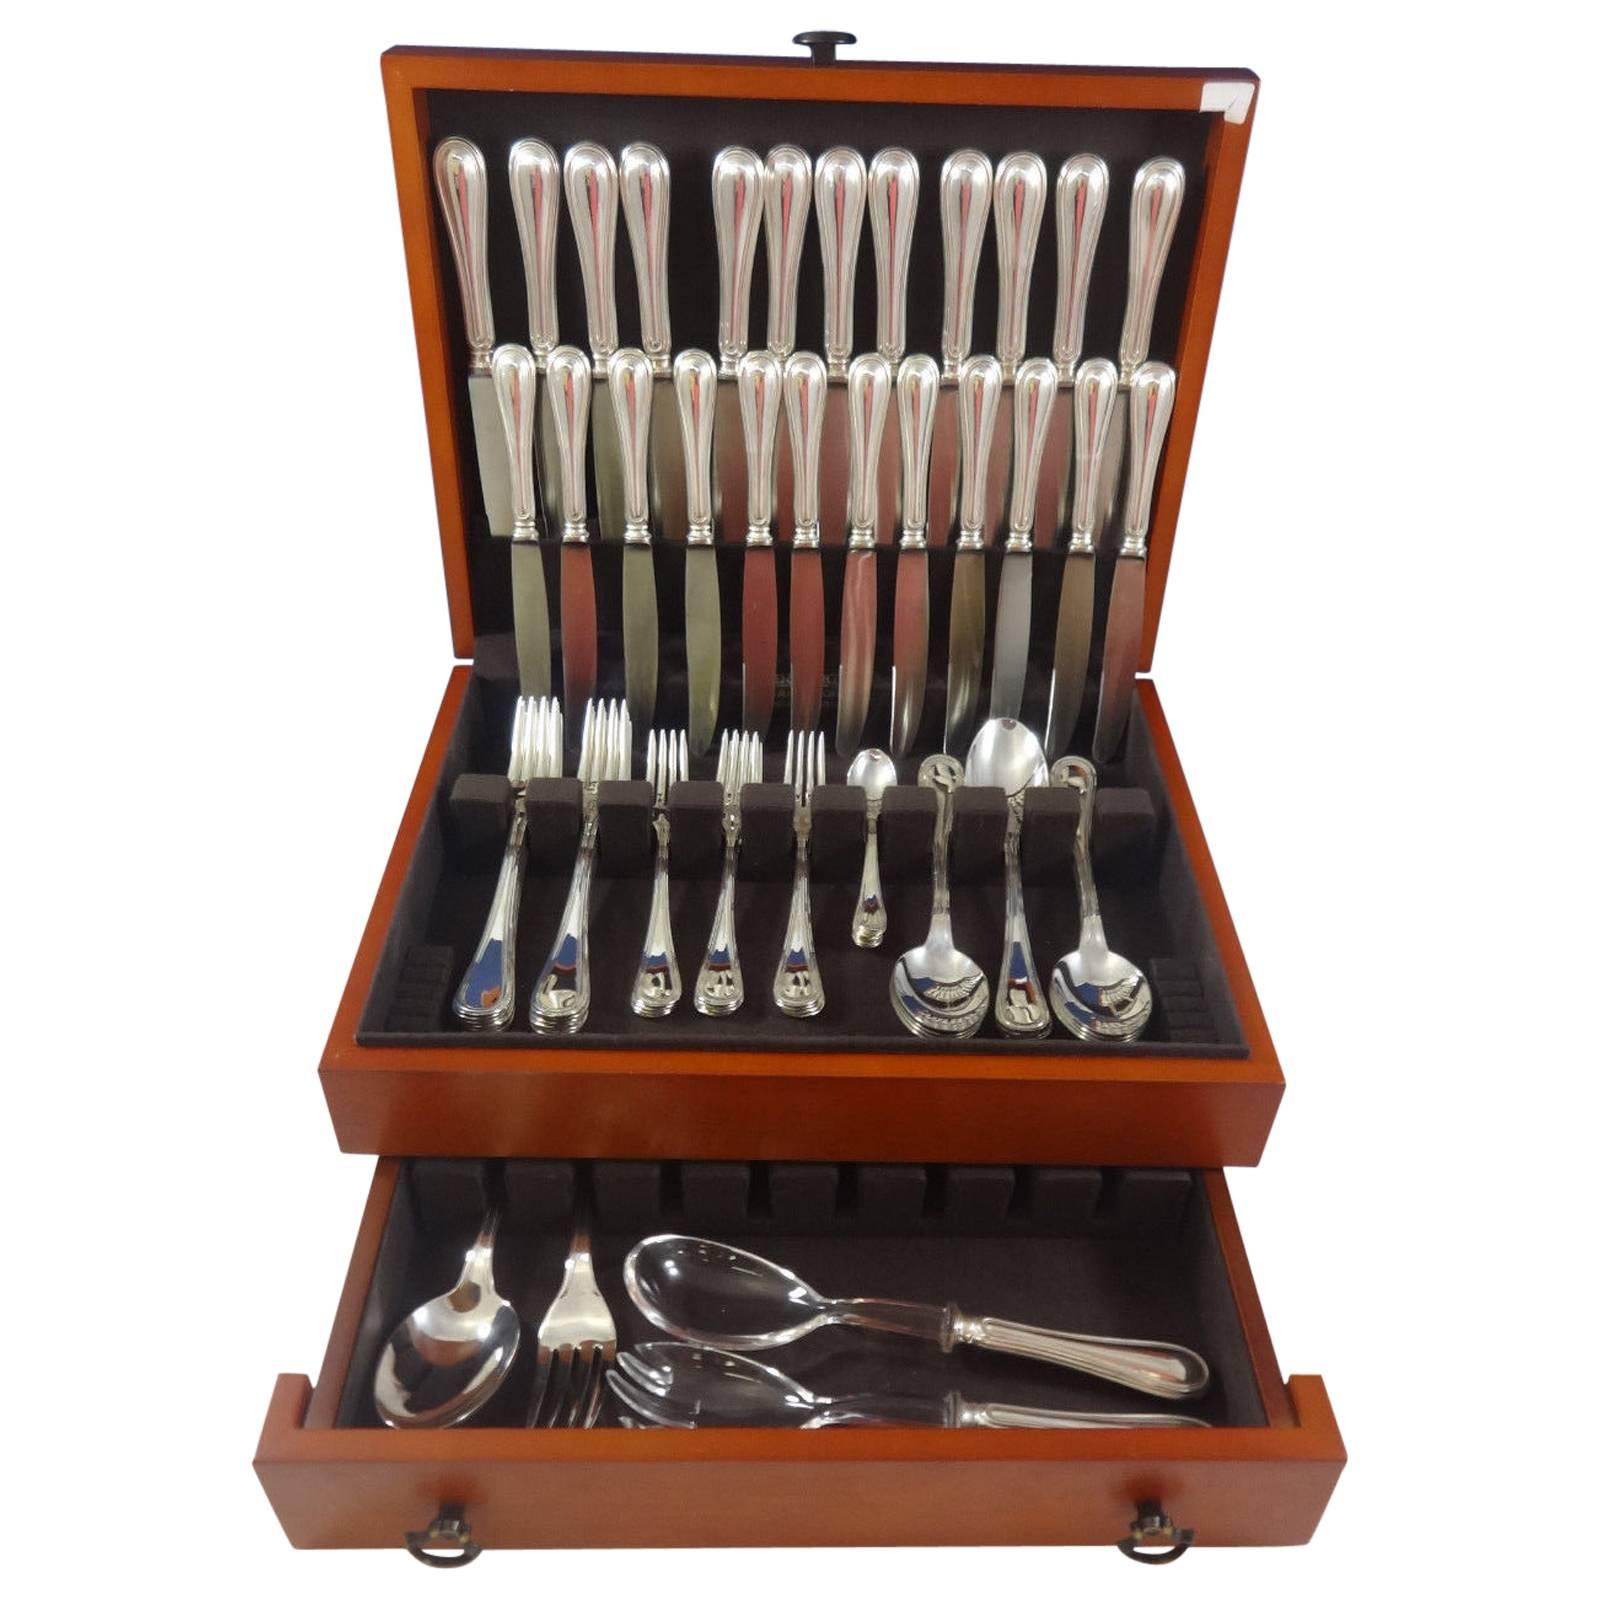 The strong lines and distinctive shape of this pattern are perfect for contemporary tables. European size, meticulously crafted in Italy.

Stunning Giorgio Italian 800 silver flatware set, 76 pieces. Well-made - large and heavy.

This set